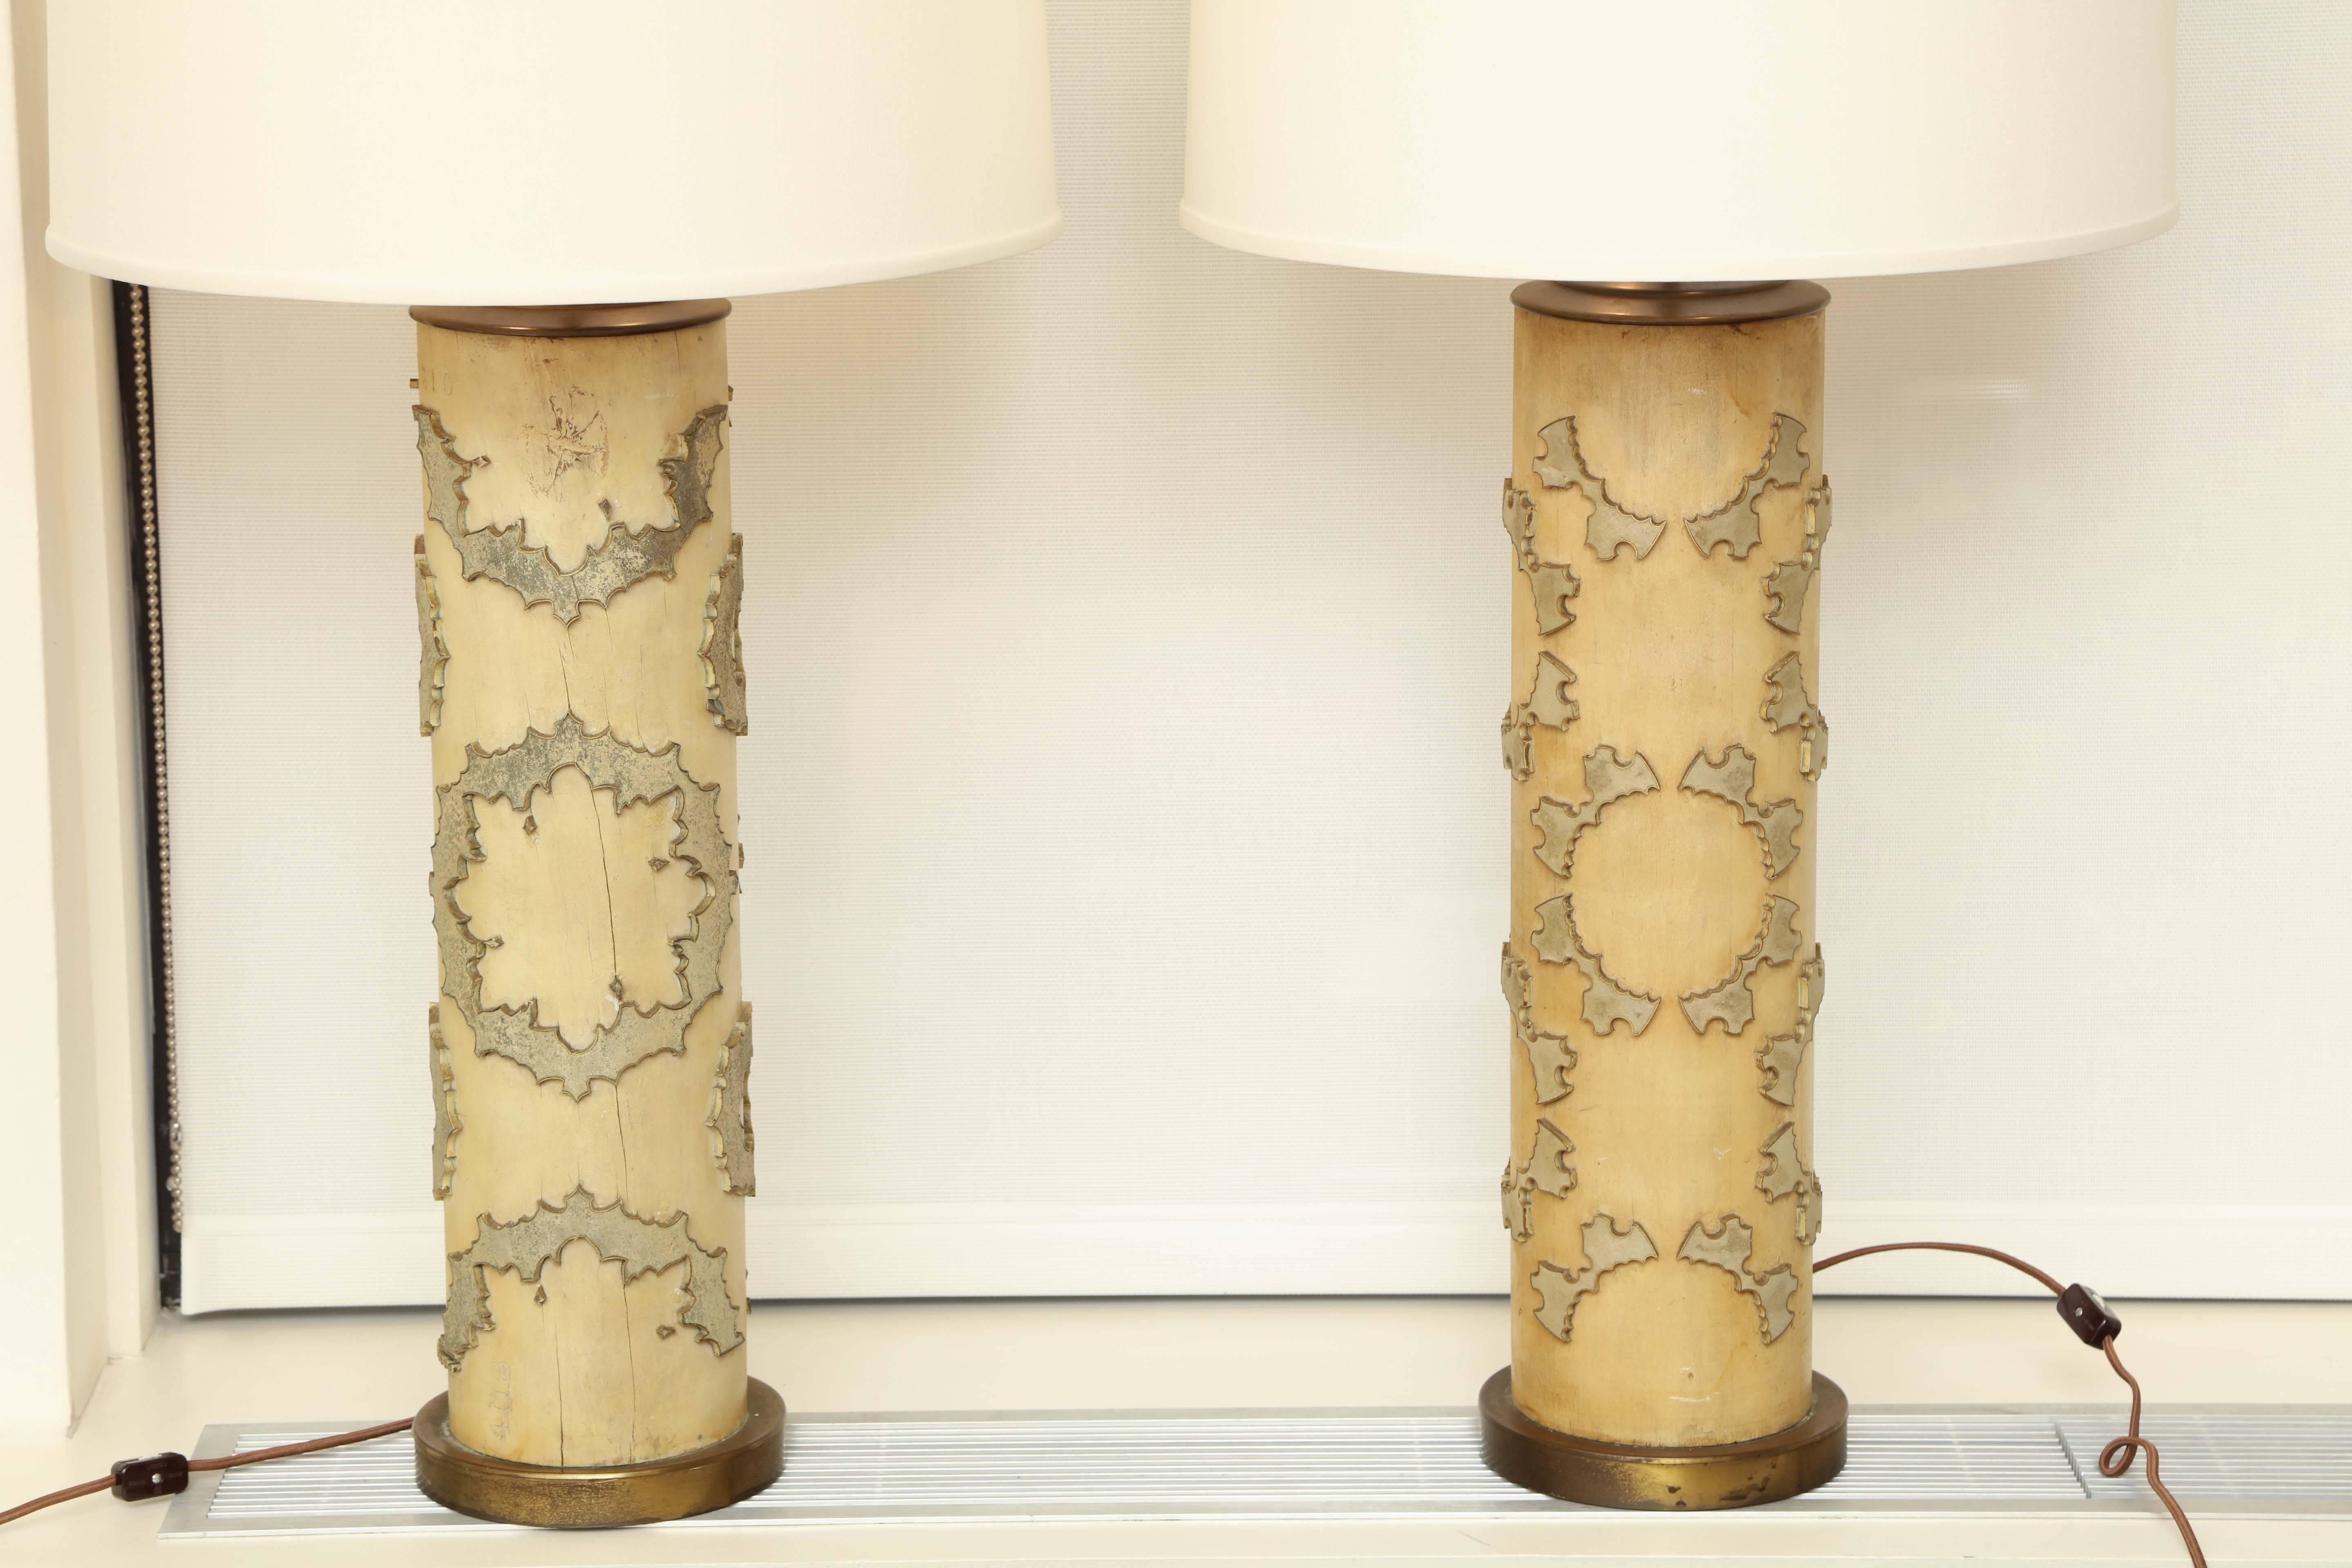 Pair of pale green wallpaper lamps with contrasting patterns, circa 1940.
Includes ivory silk shade (17